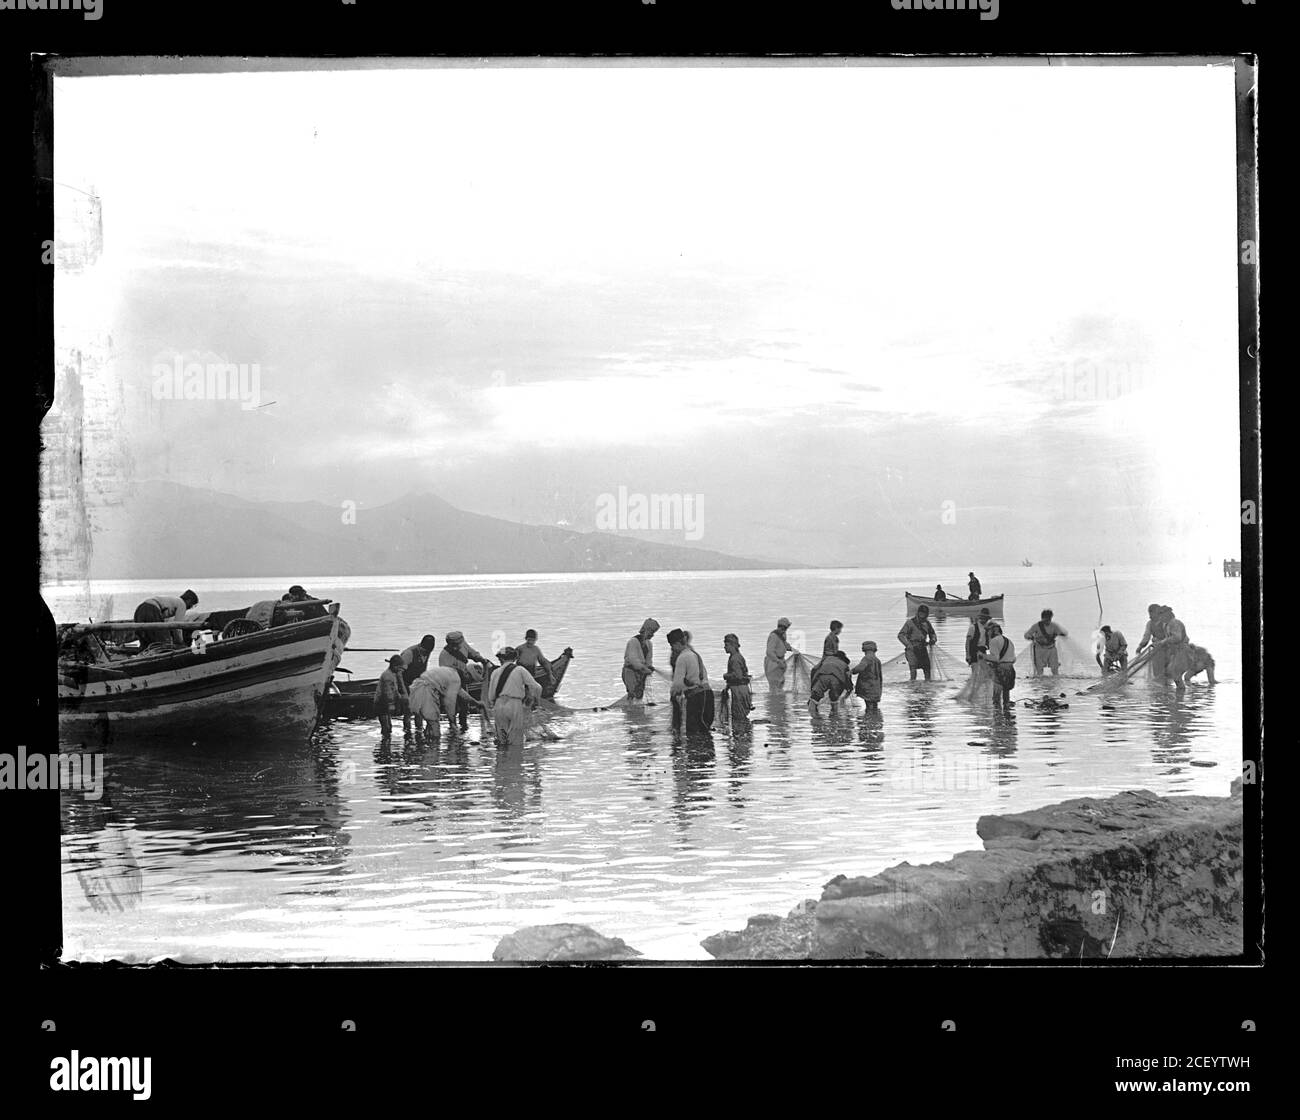 Turkish fishermen preparing their equiment and fishernet for the next fishing. Turkey, presumably near Izmir (Smyrna). Photograph on dry glass plate from the Herry W. Schaefer collection, around 1913. Stock Photo